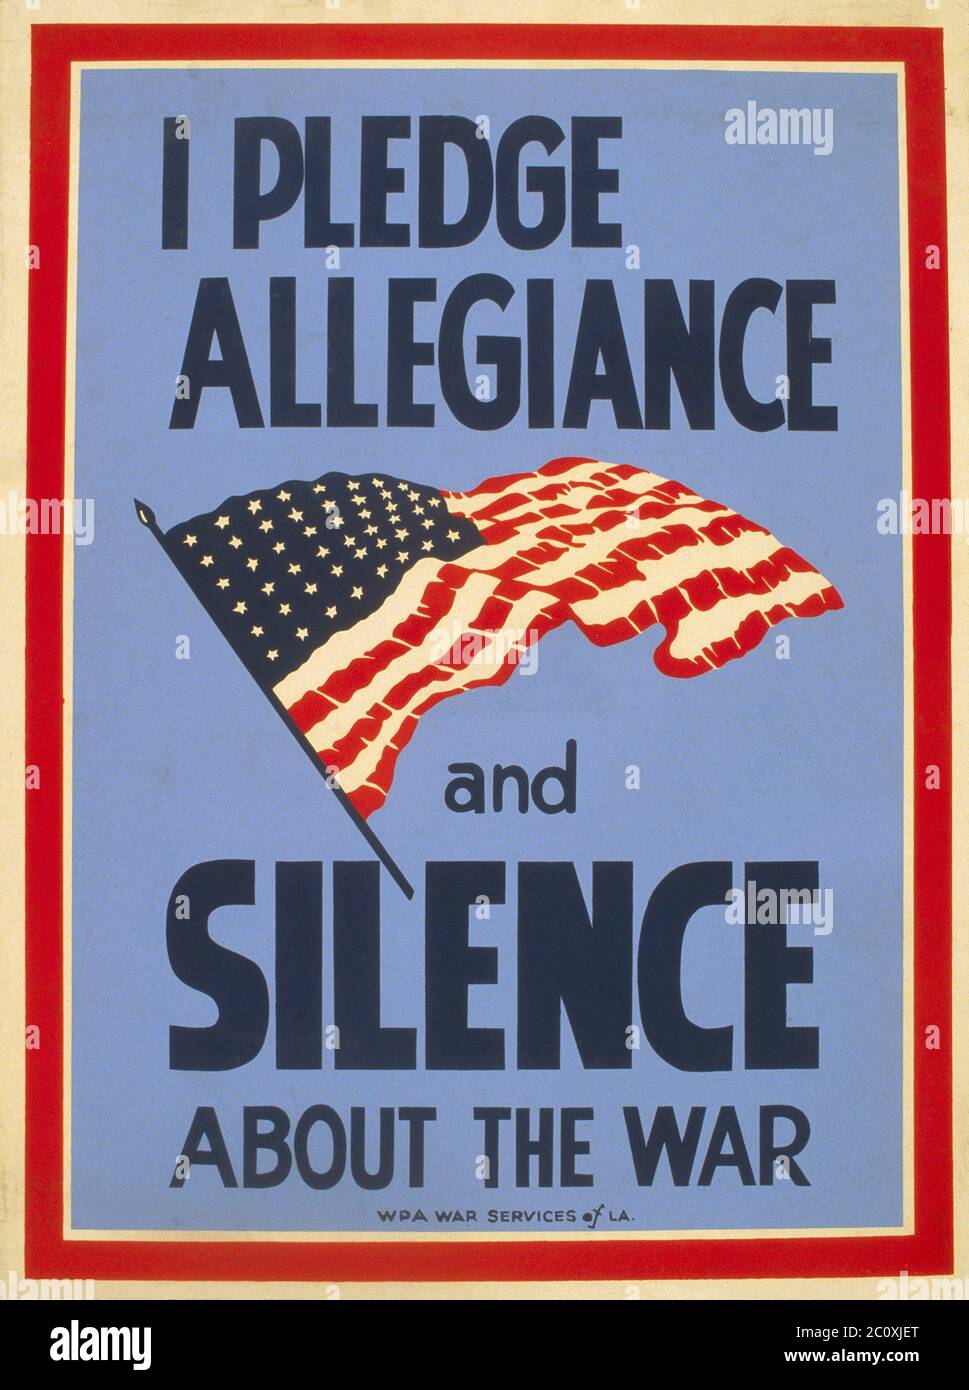 'I Pledge Allegiance and Silence about the War', Poster promoting Patriotism and suggesting that Careless Communication may be harmful to War Effort, Thomas A. Byrne, U.S.A. Work Projects Administration, 1942 Stock Photo